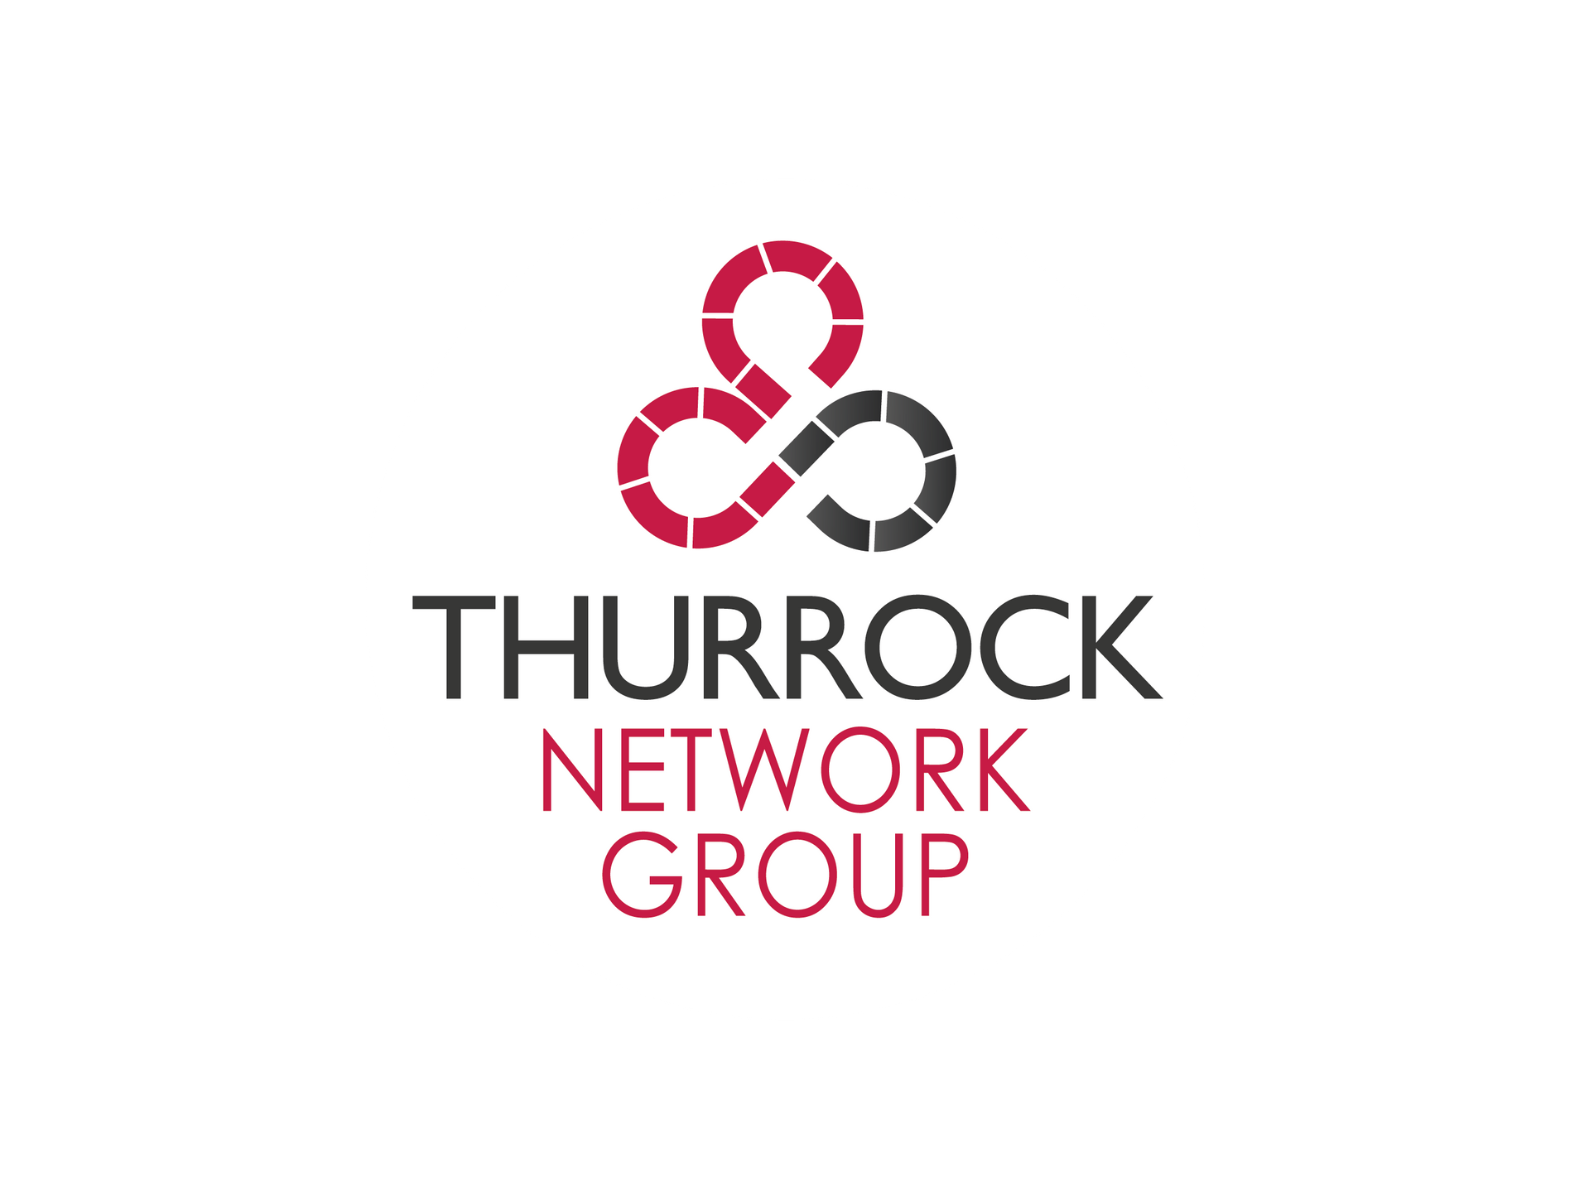 Thurrock Network Group